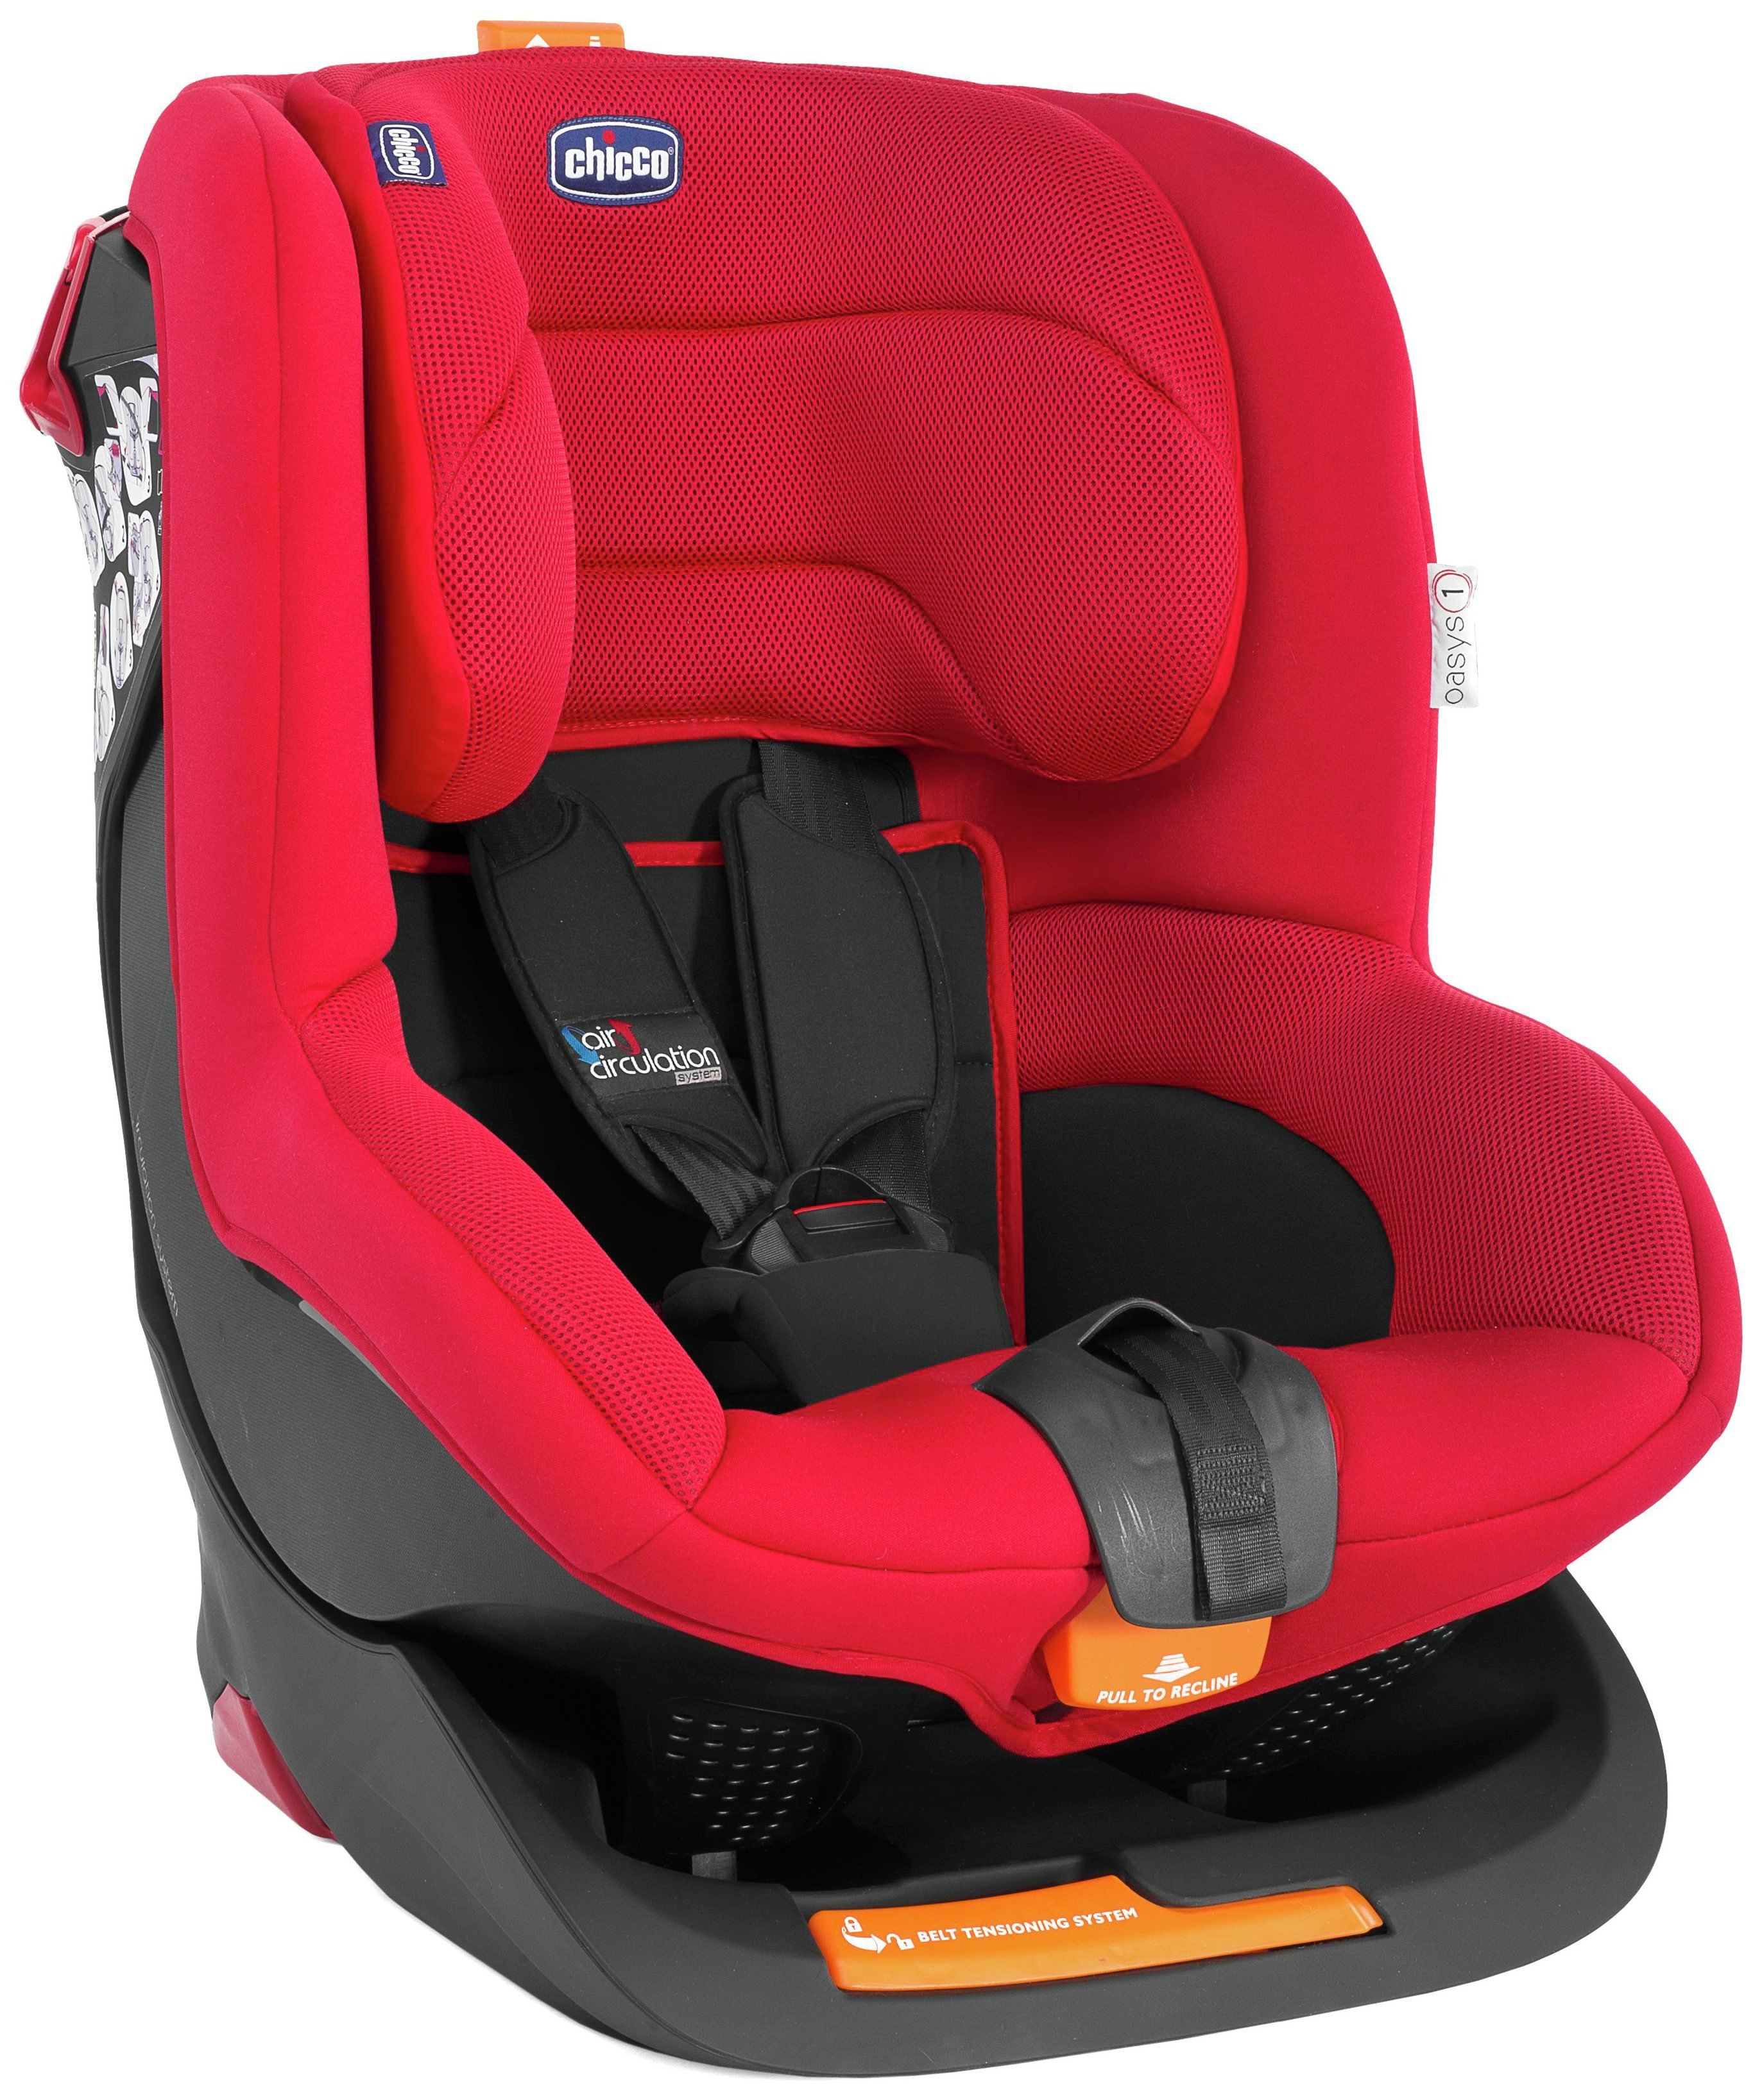 Chicco Oasys Group 1 Car Seat - Fire